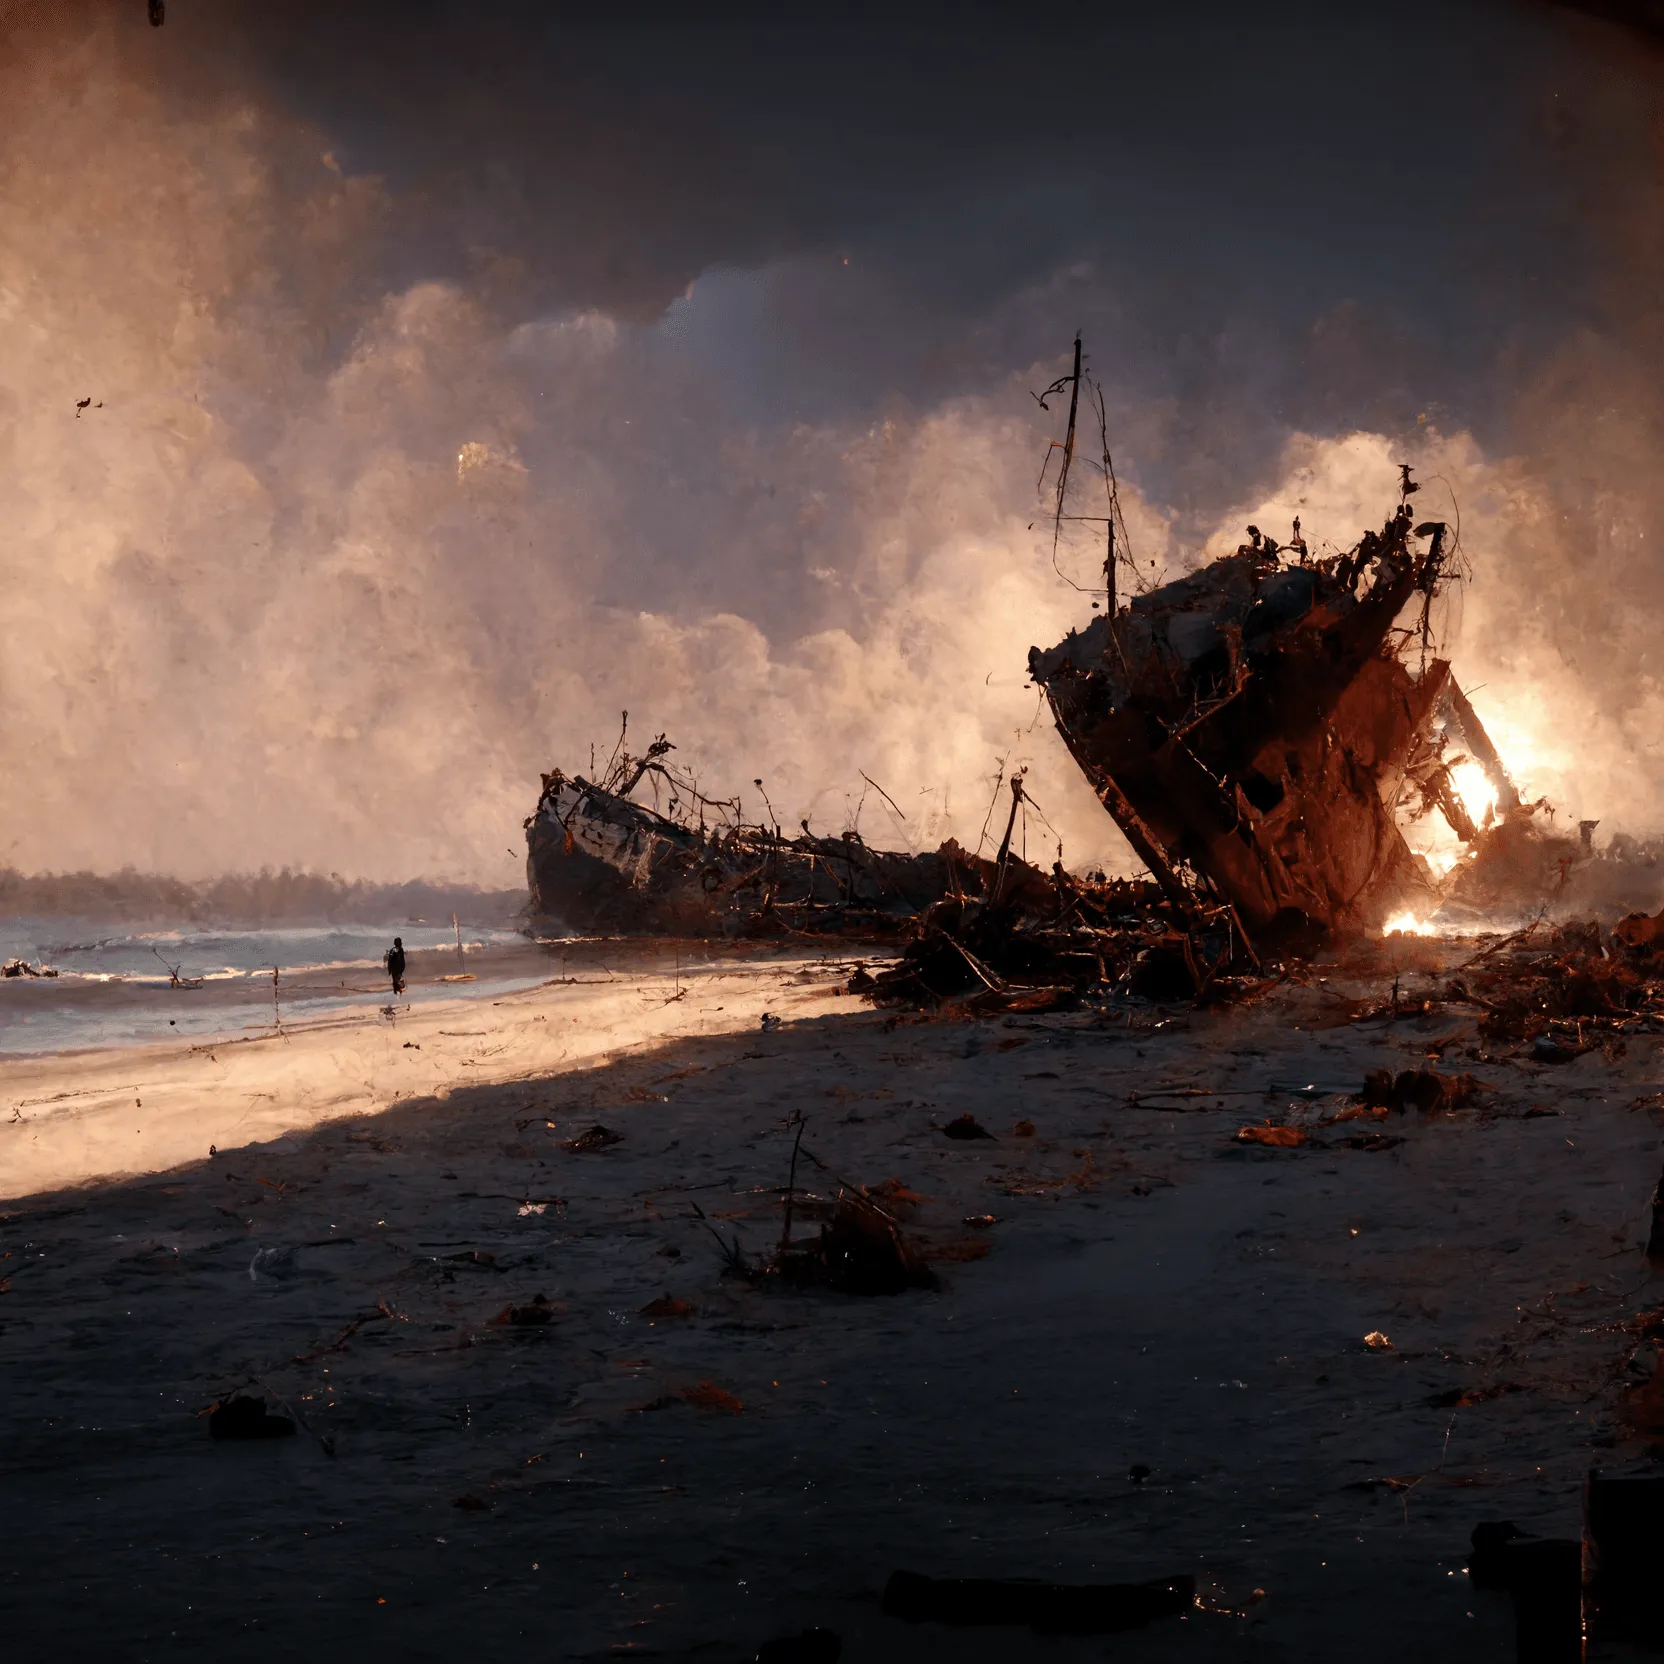 Parts of ships washed up on a sandy beach - lore of the Aeternum and New World